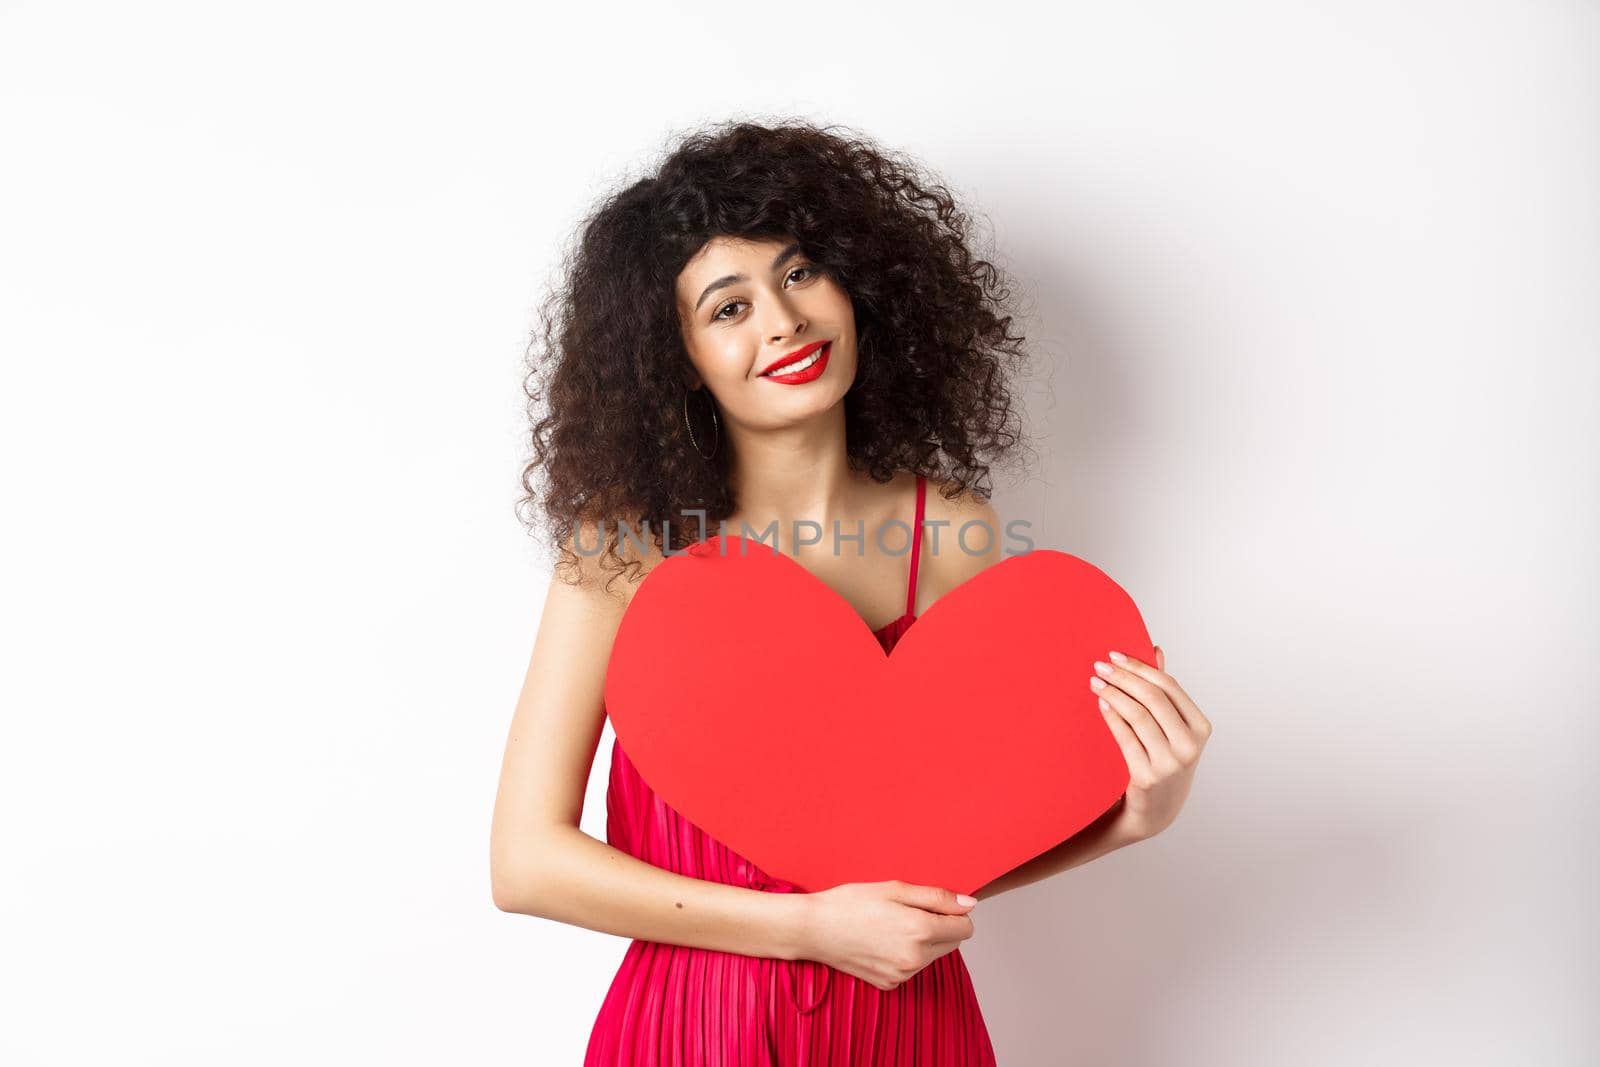 Romantic tender woman with curly hair, hugging big red heart and smiling, look with love, standing against white background.